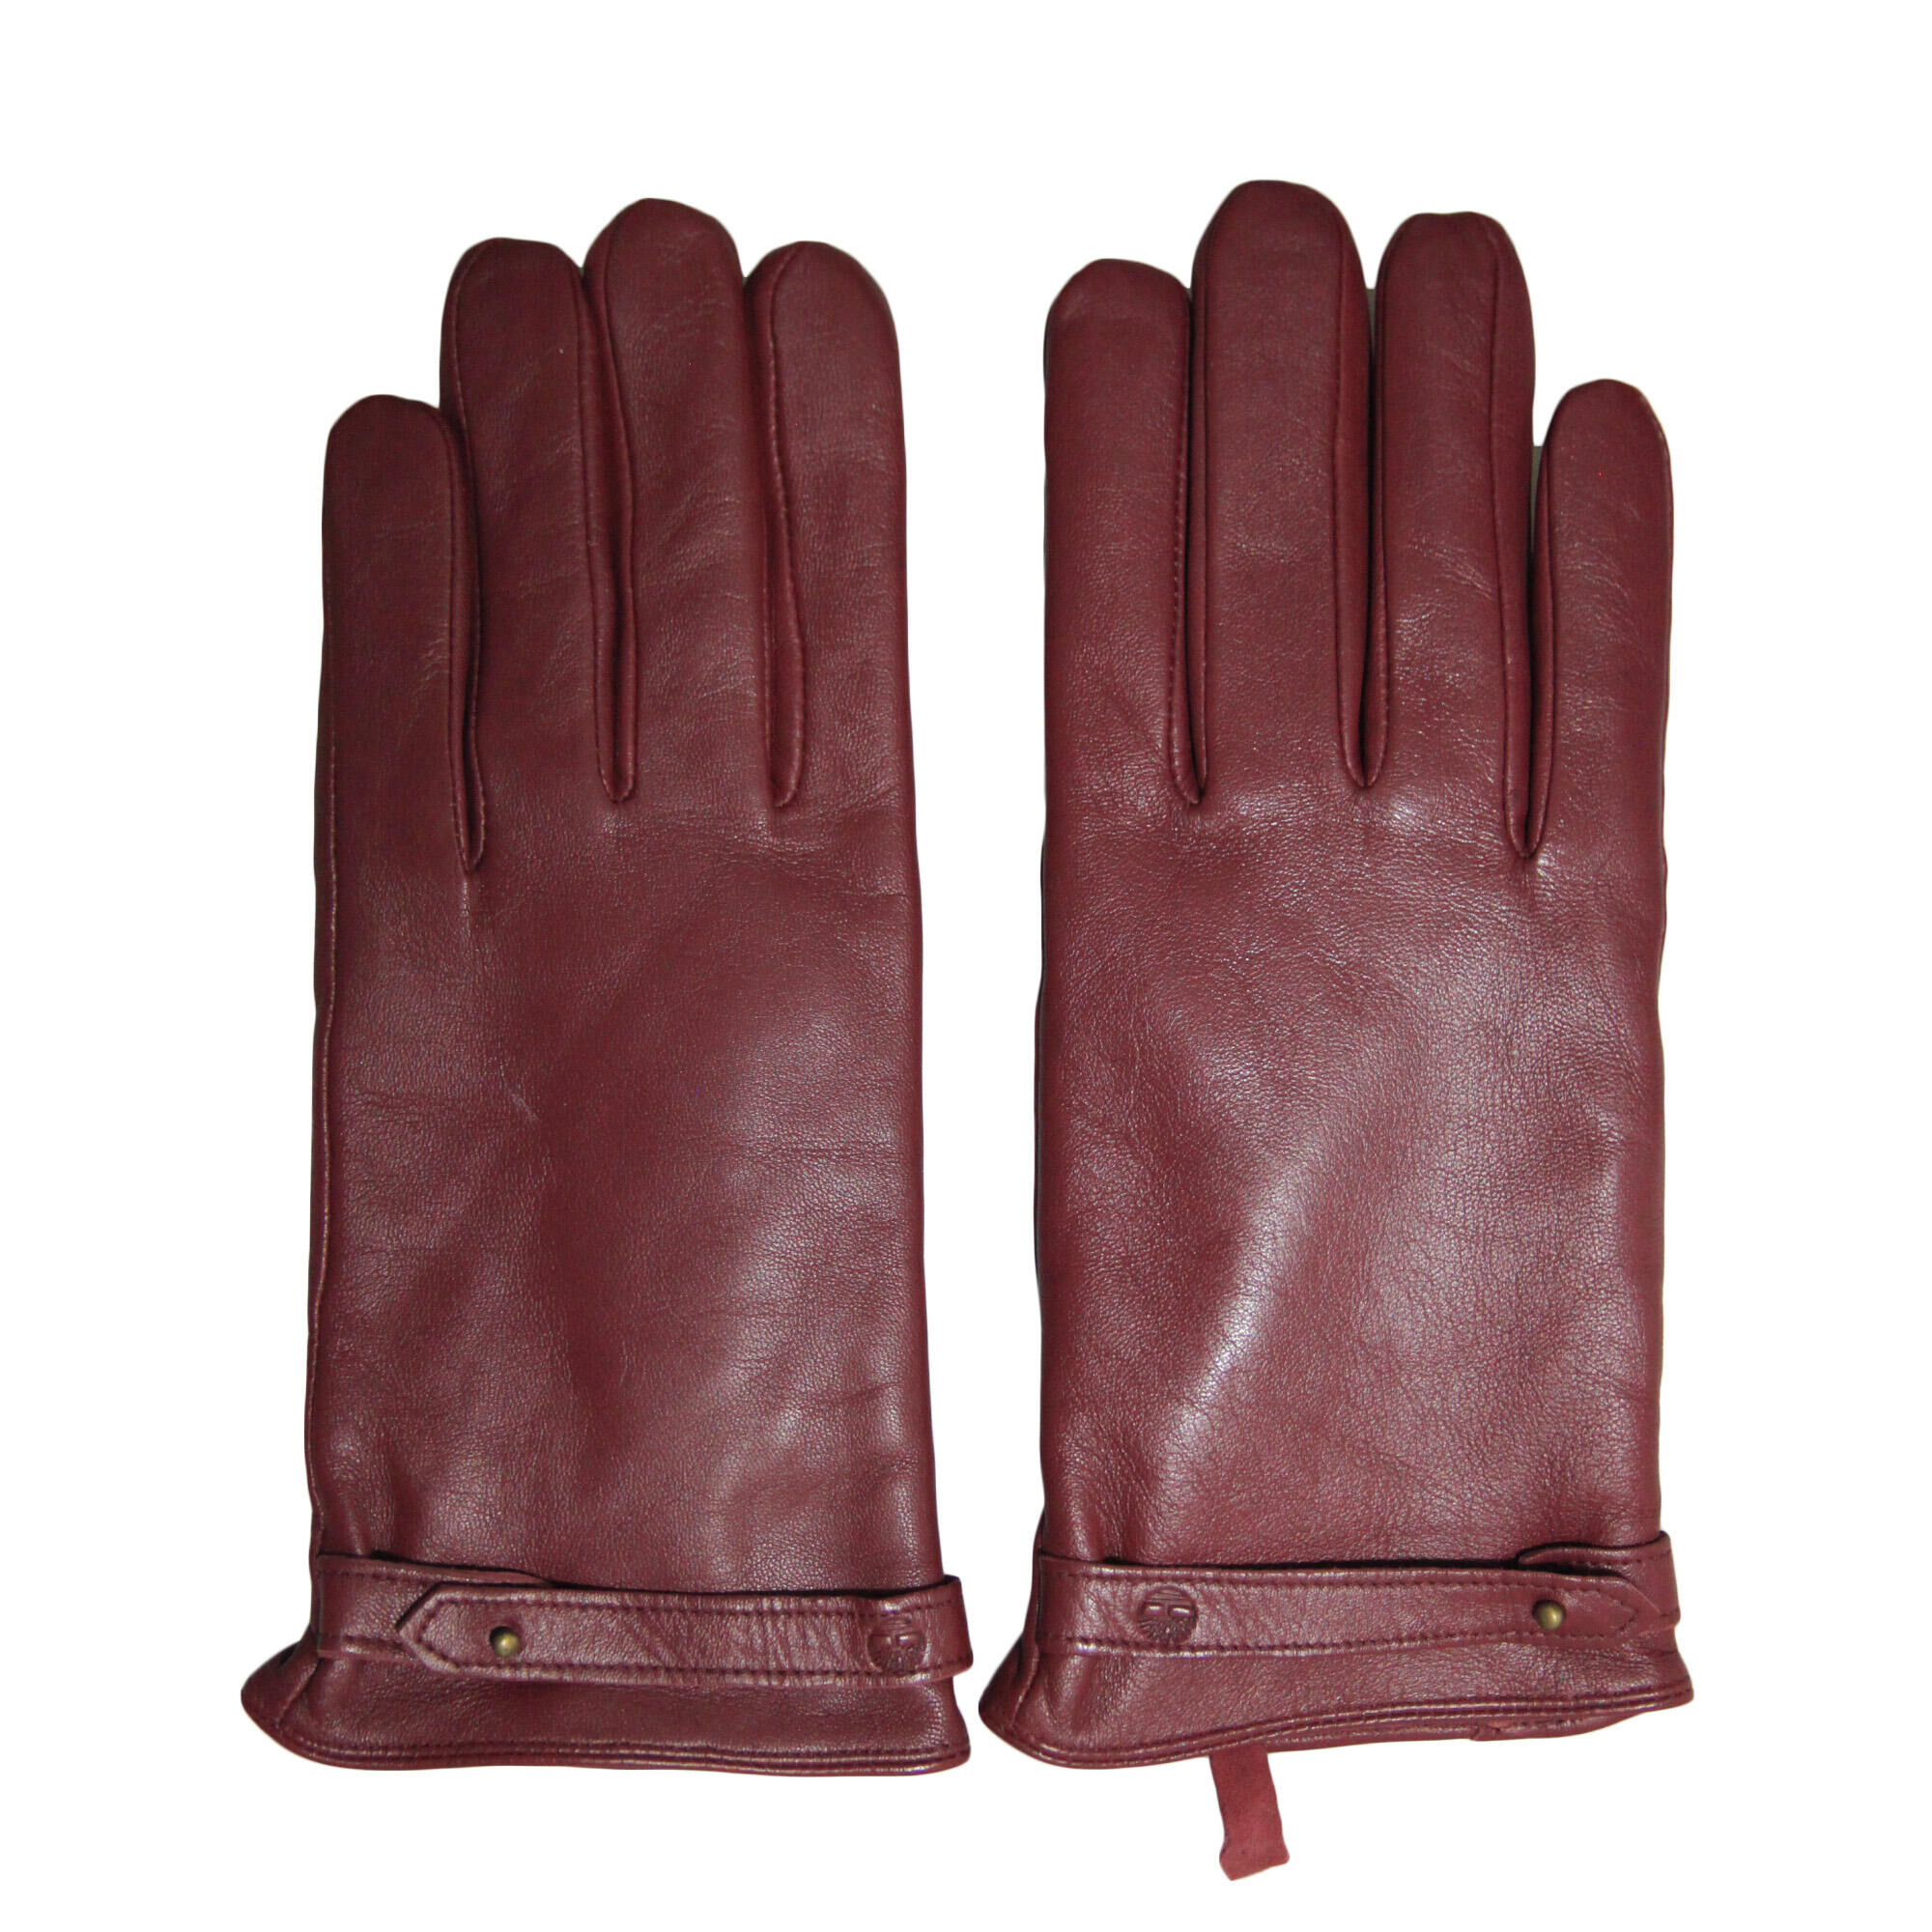 TIMBERLAND Womens/Ladies Leather Gloves (Burgundy)